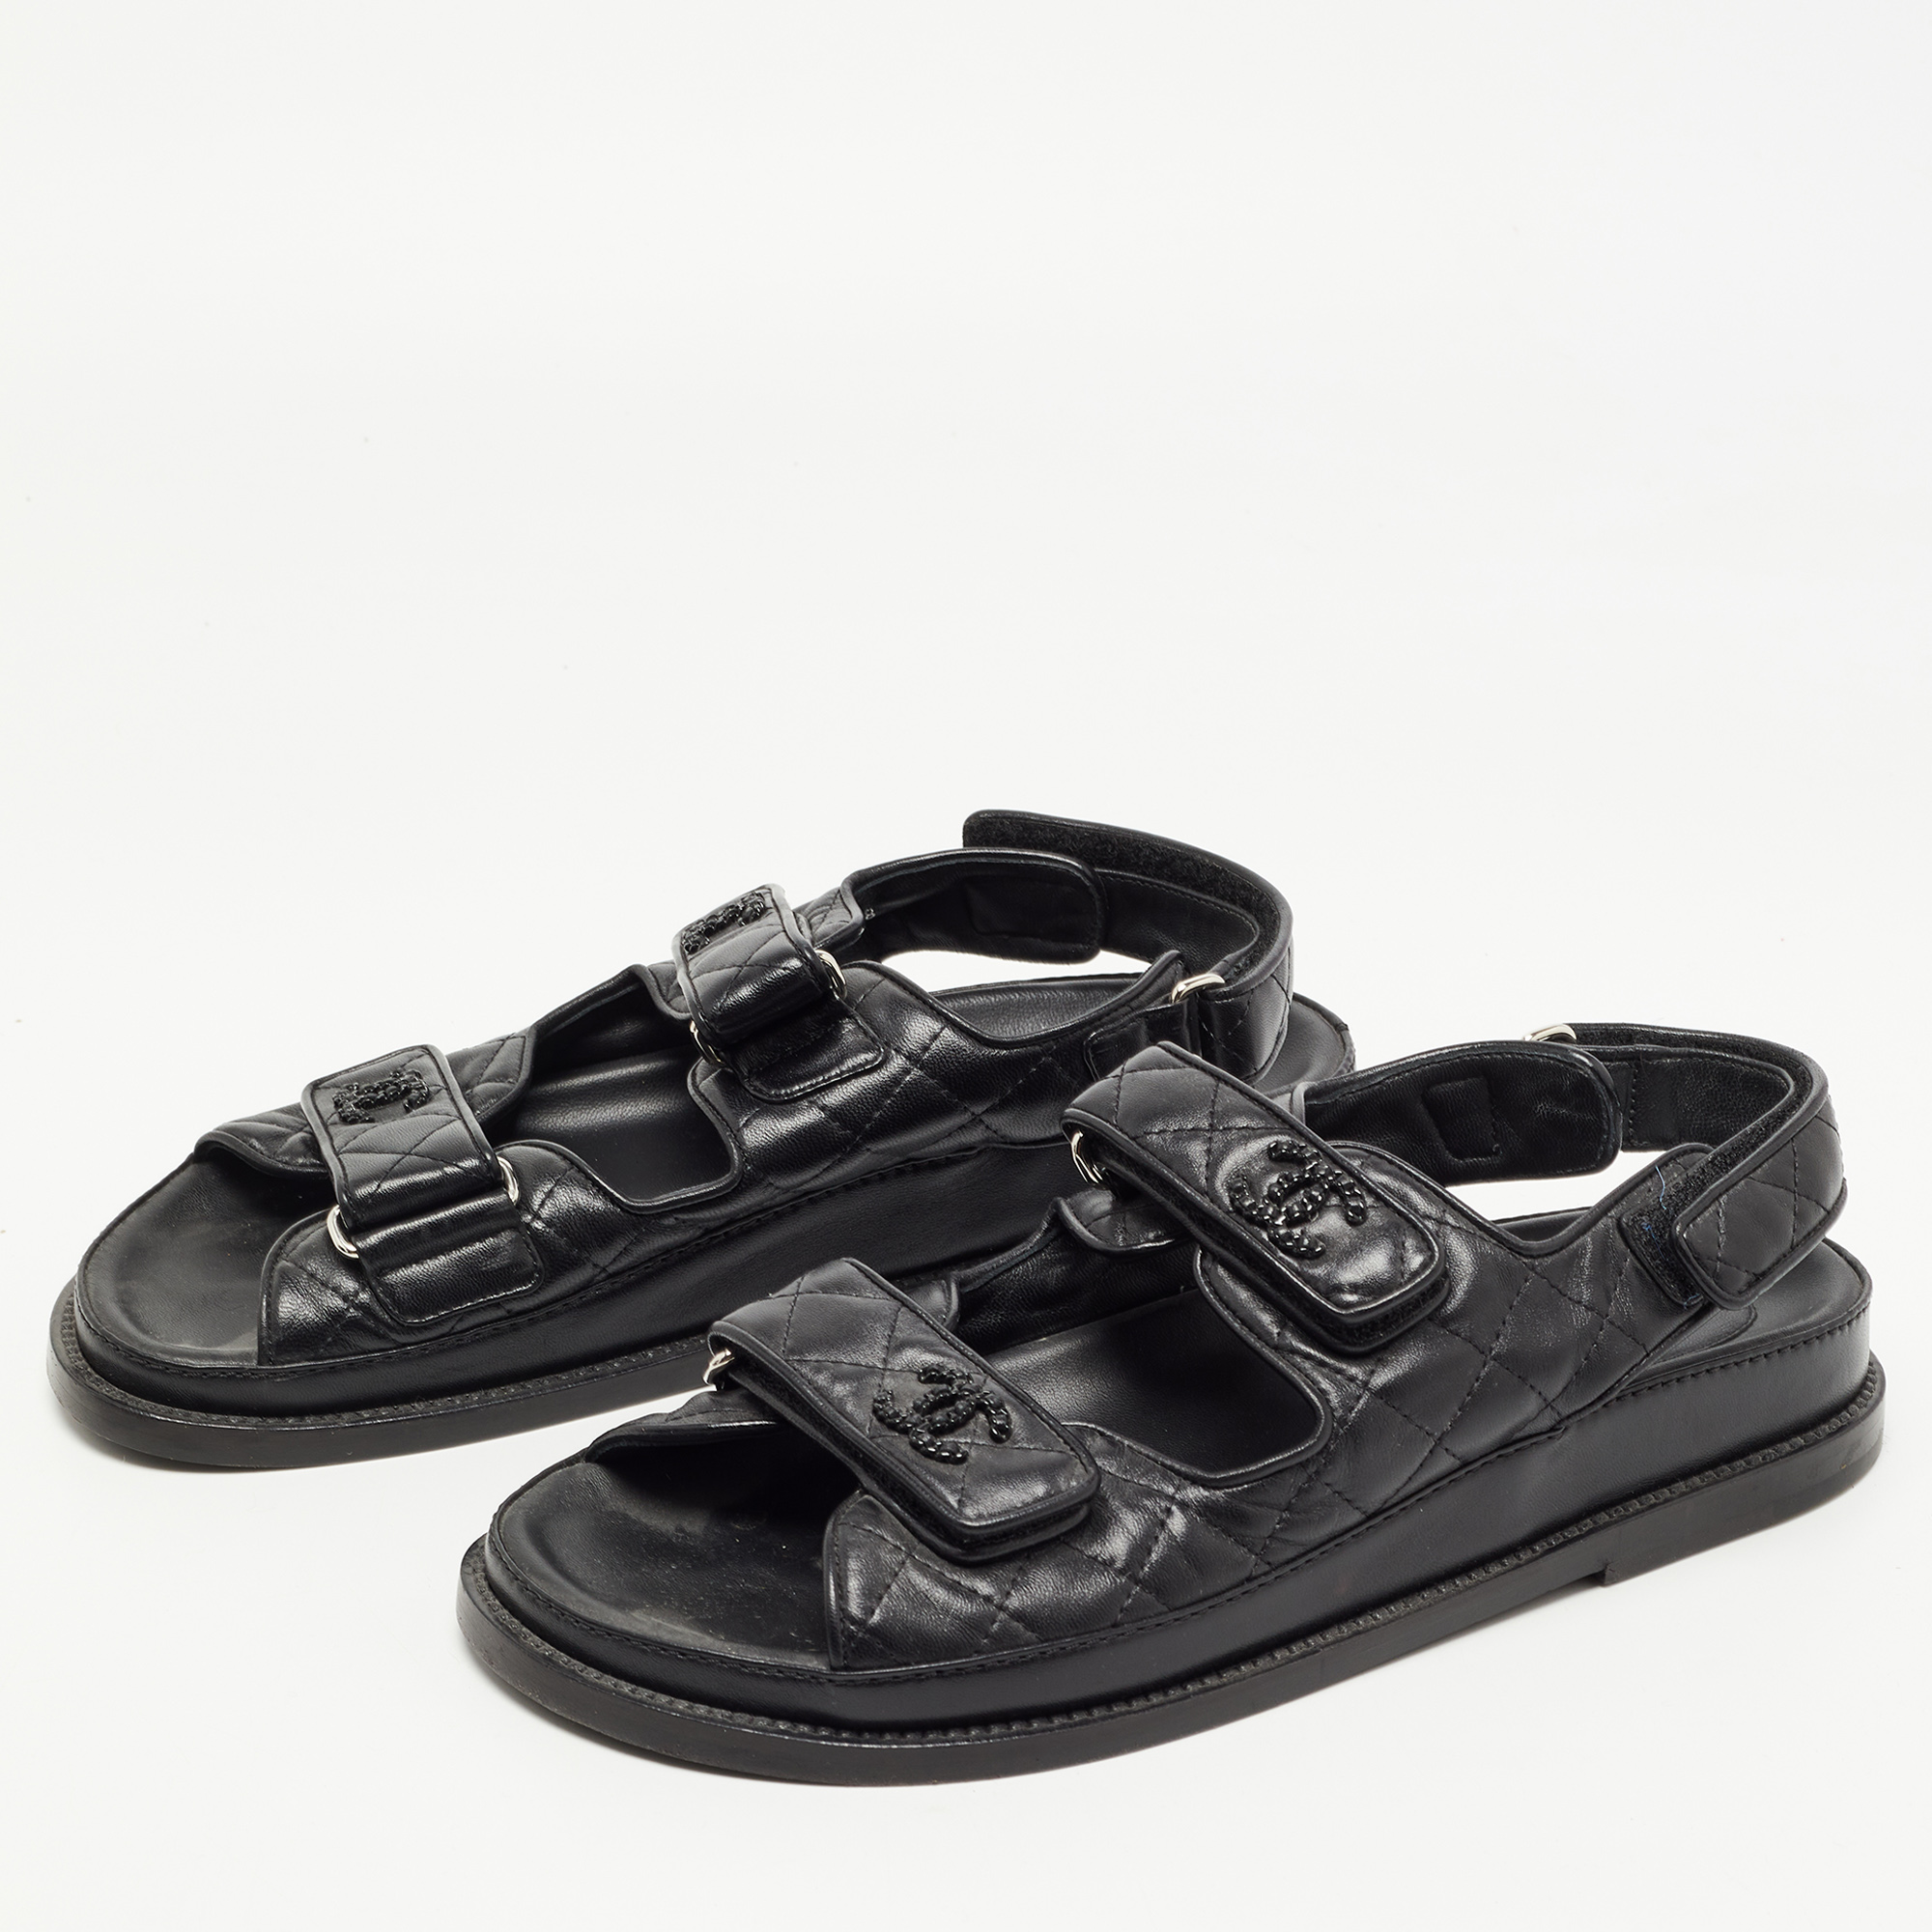 Chanel Black Leather Quilted CC Dad Sandals Size 38.5